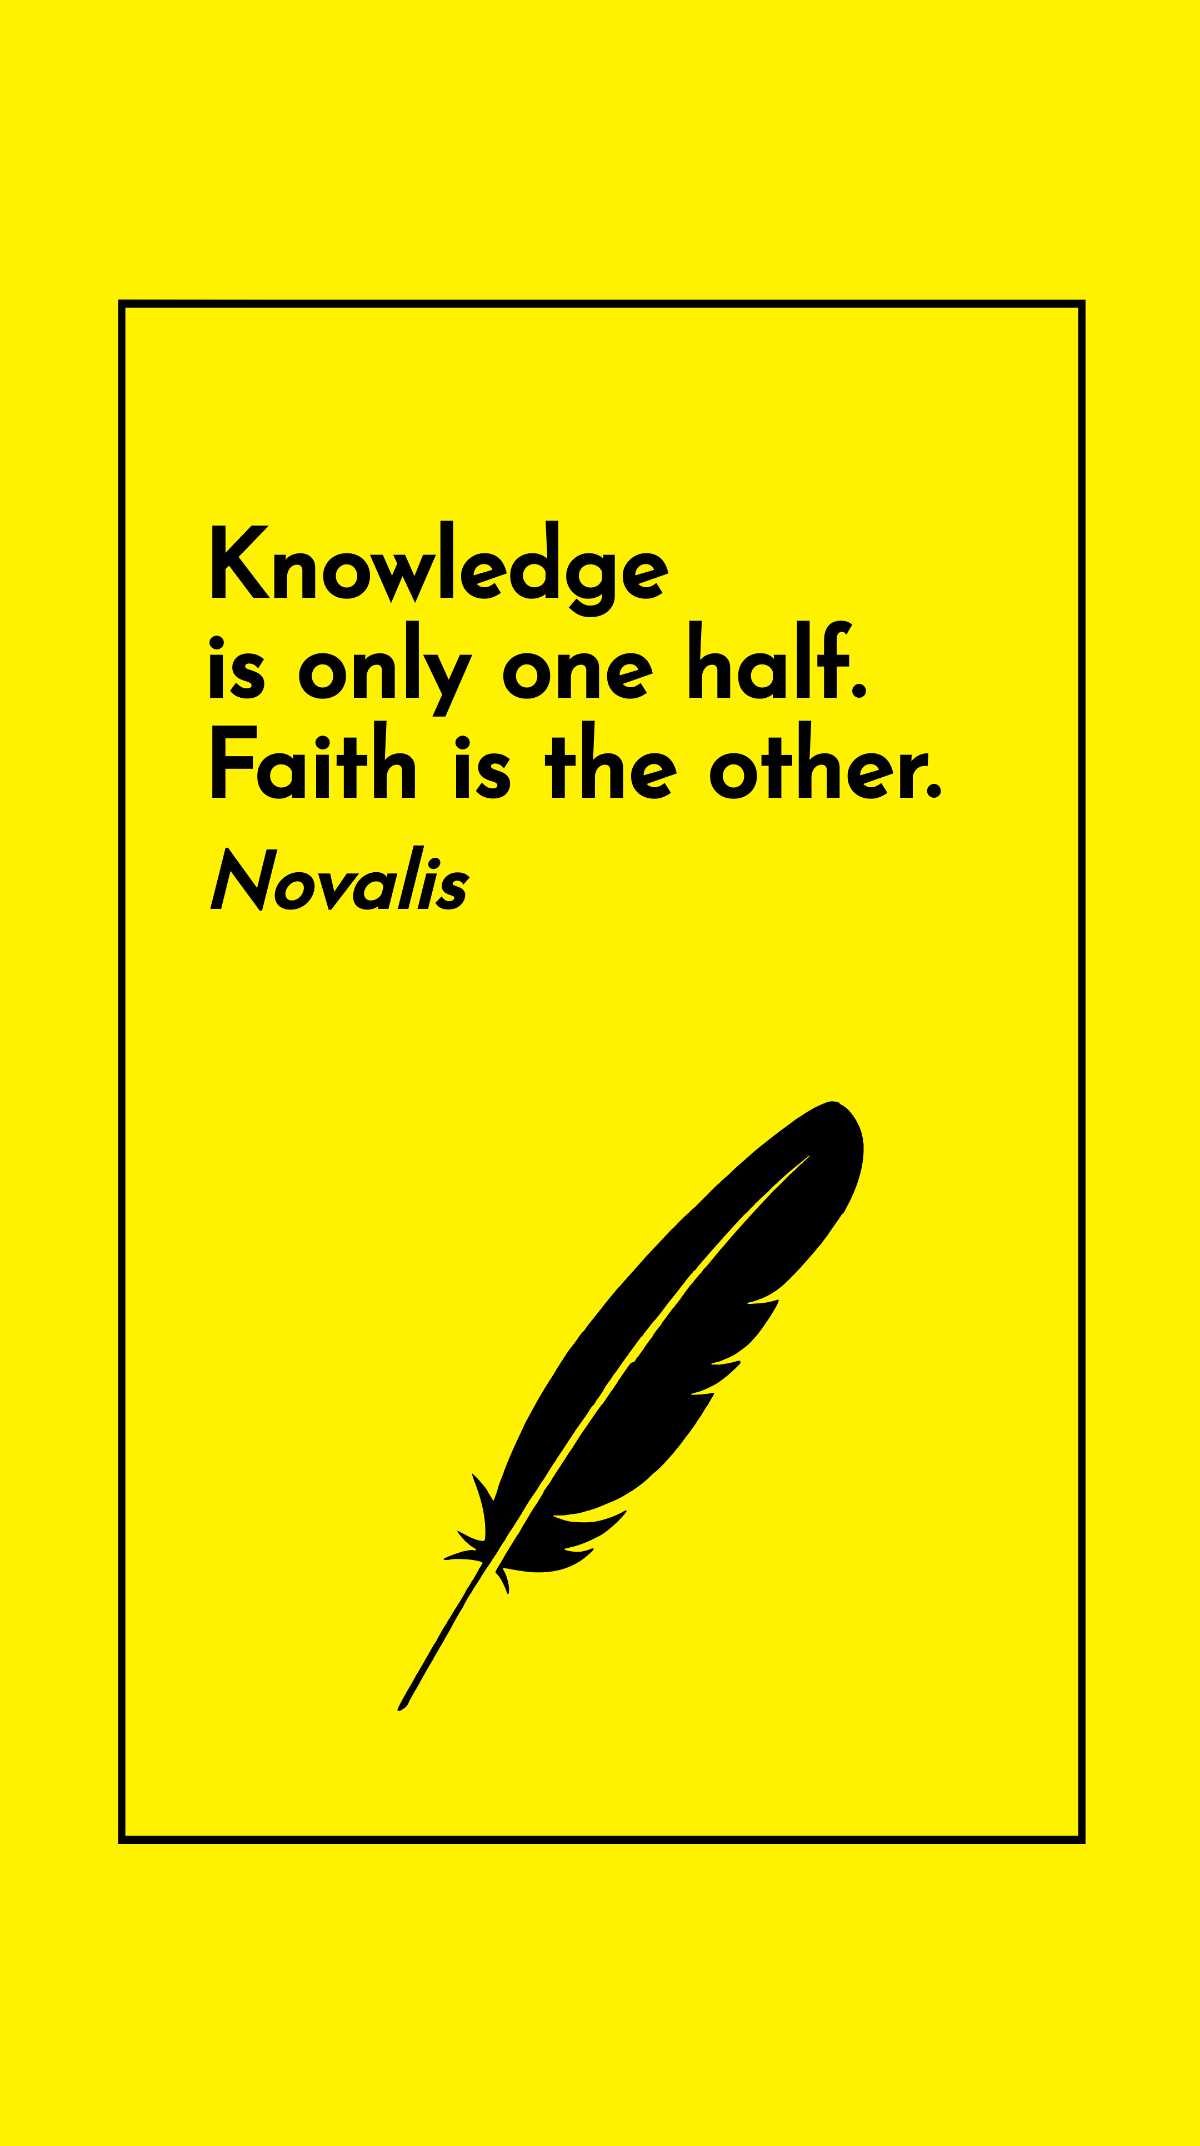 Free Novalis - Knowledge is only one half. Faith is the other. Template